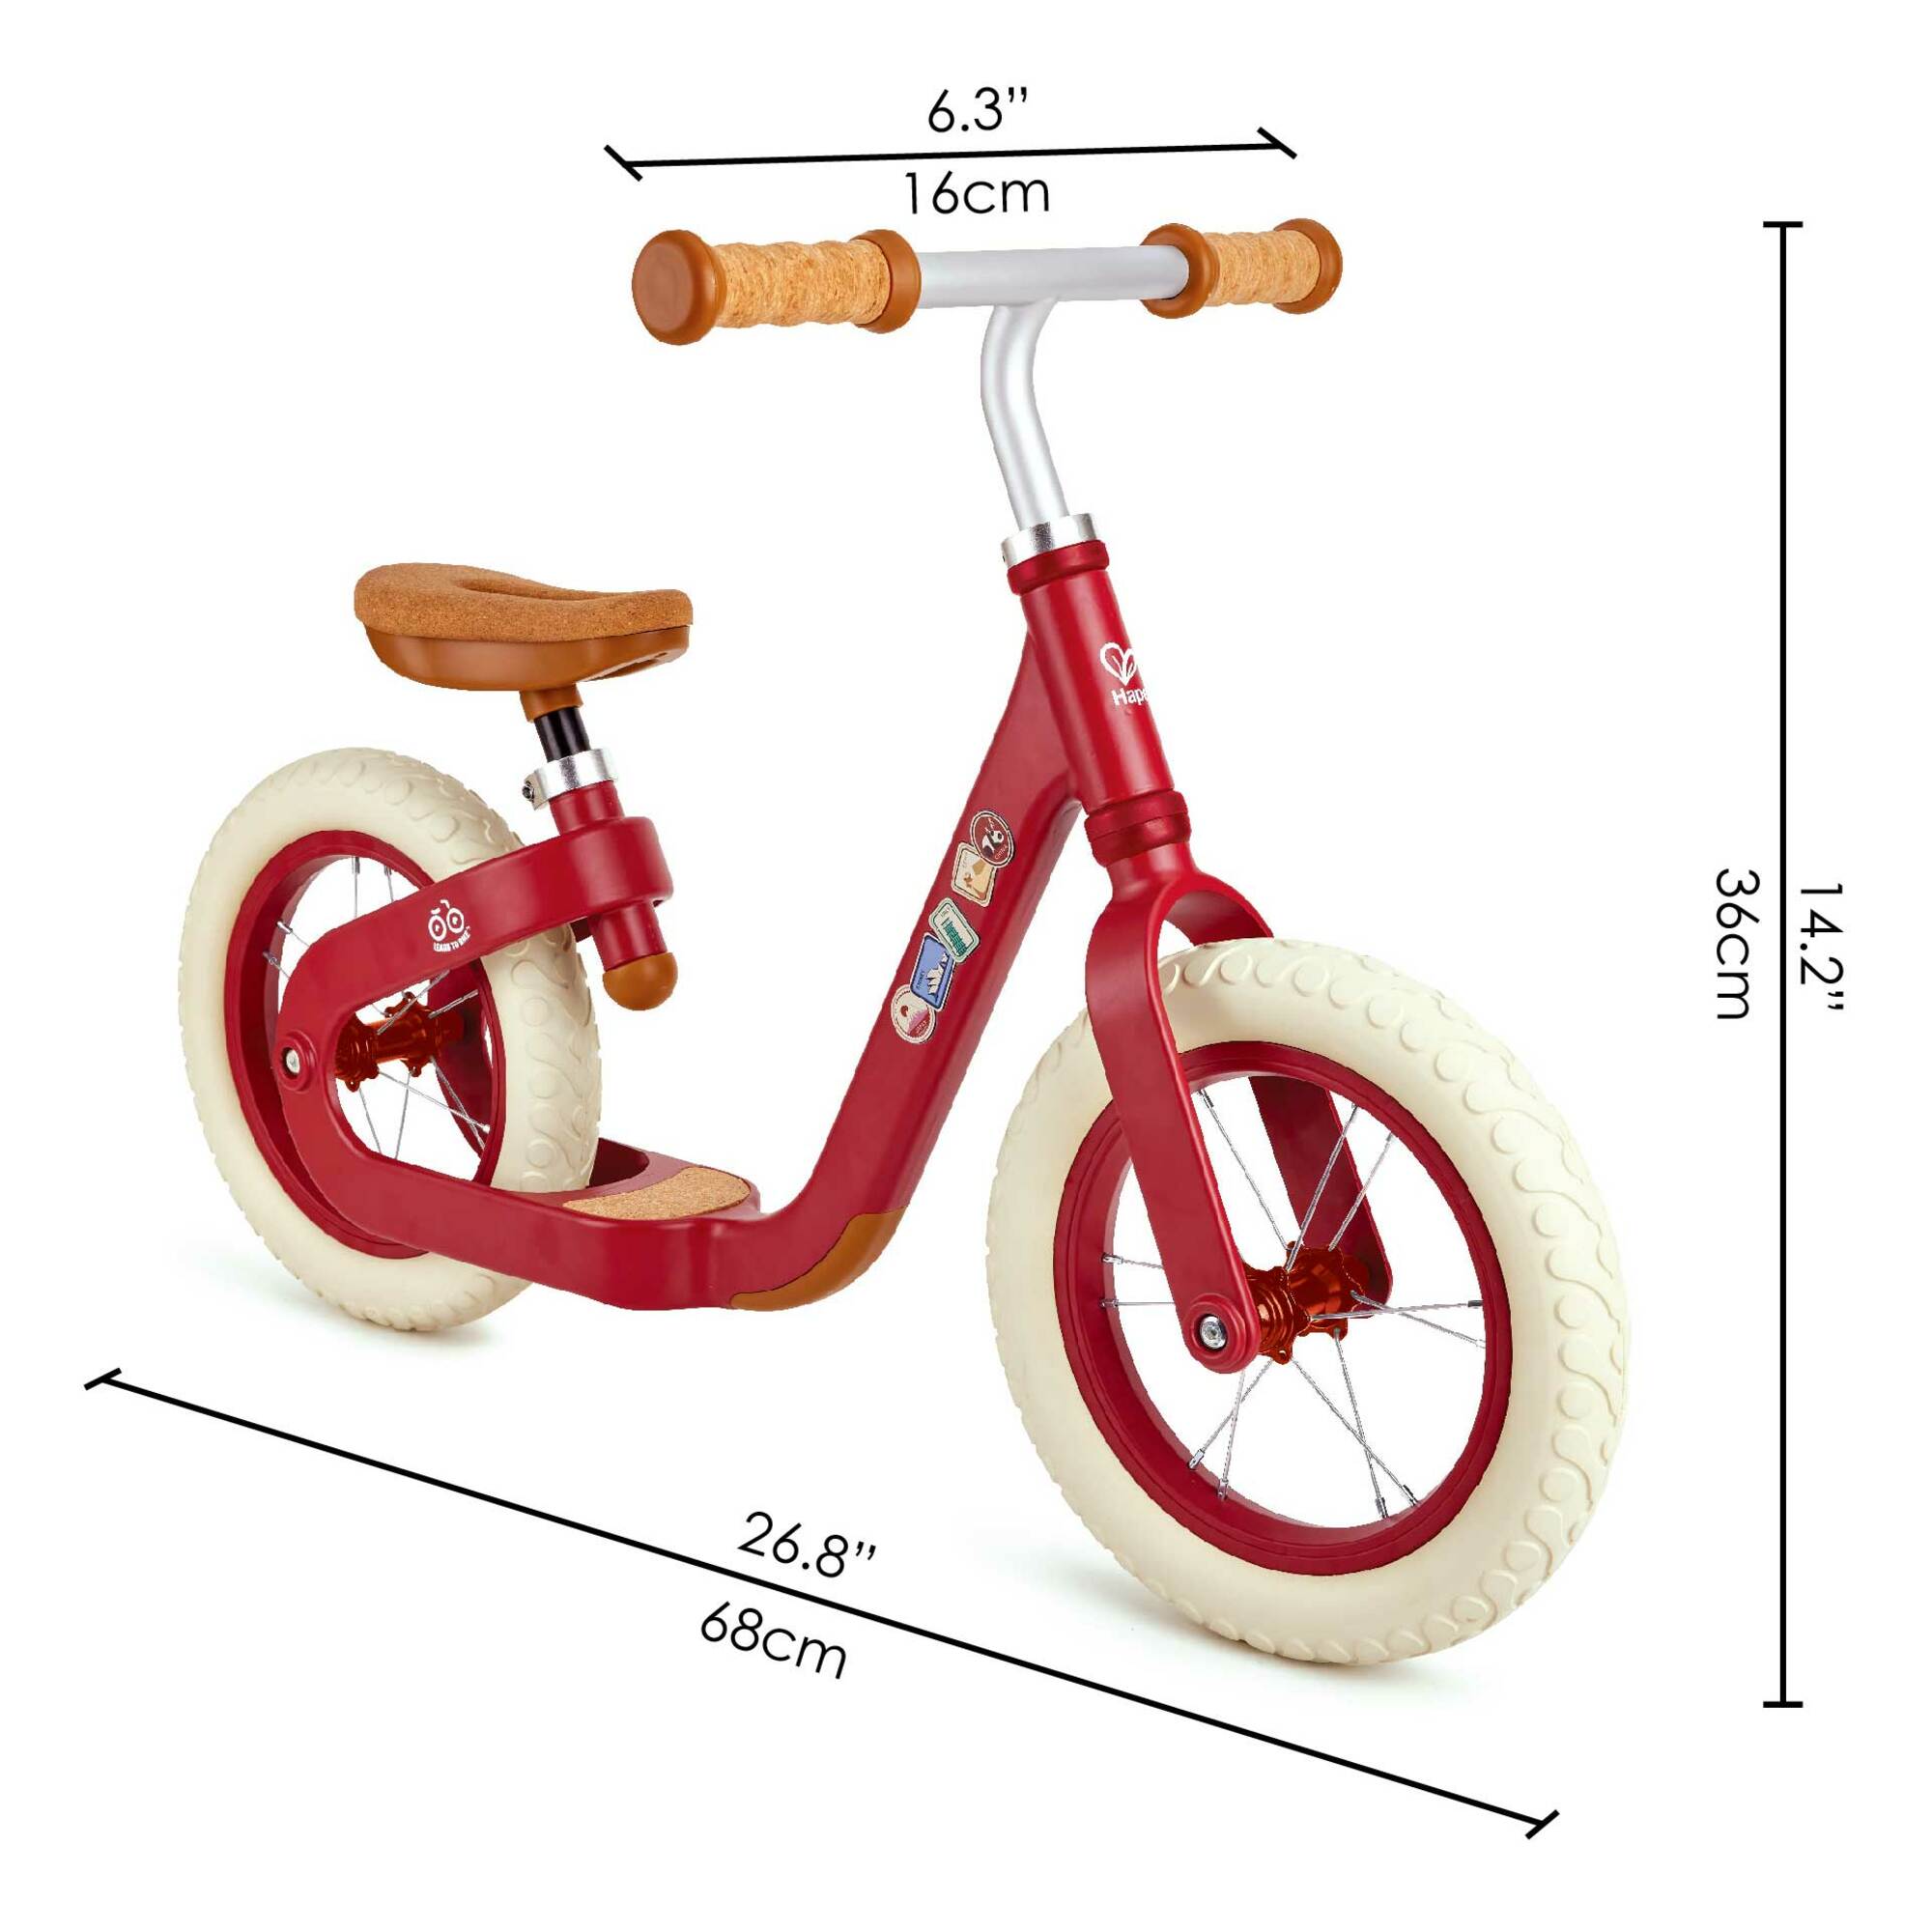 Hape Get Up & Go Learn to Ride Balance Bike in Red, Toddler & Kids